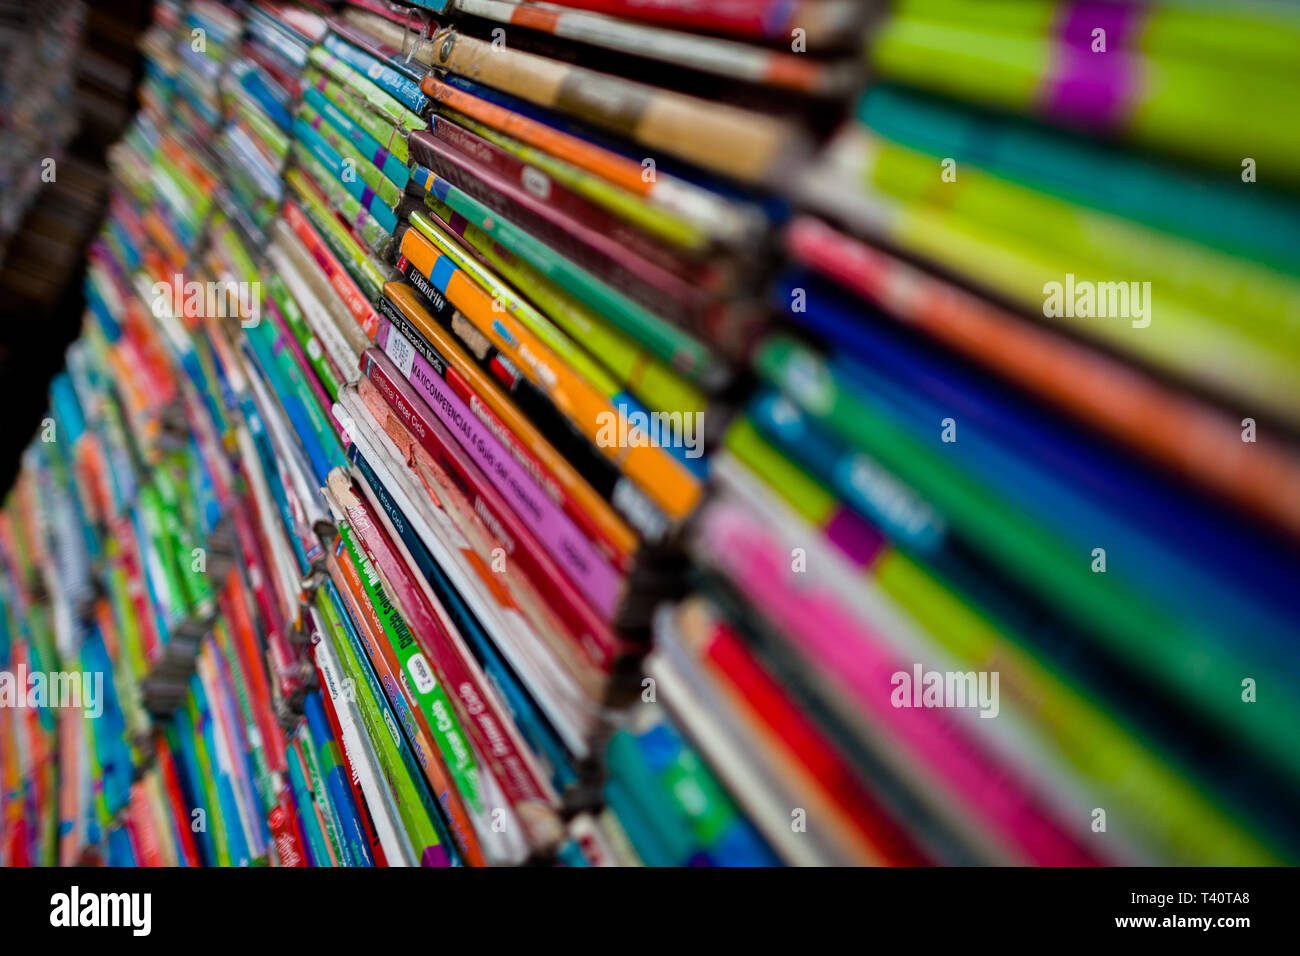 Spines of used books are seen stacked in a secondhand bookshop in San Salvador, El Salvador. Stock Photo